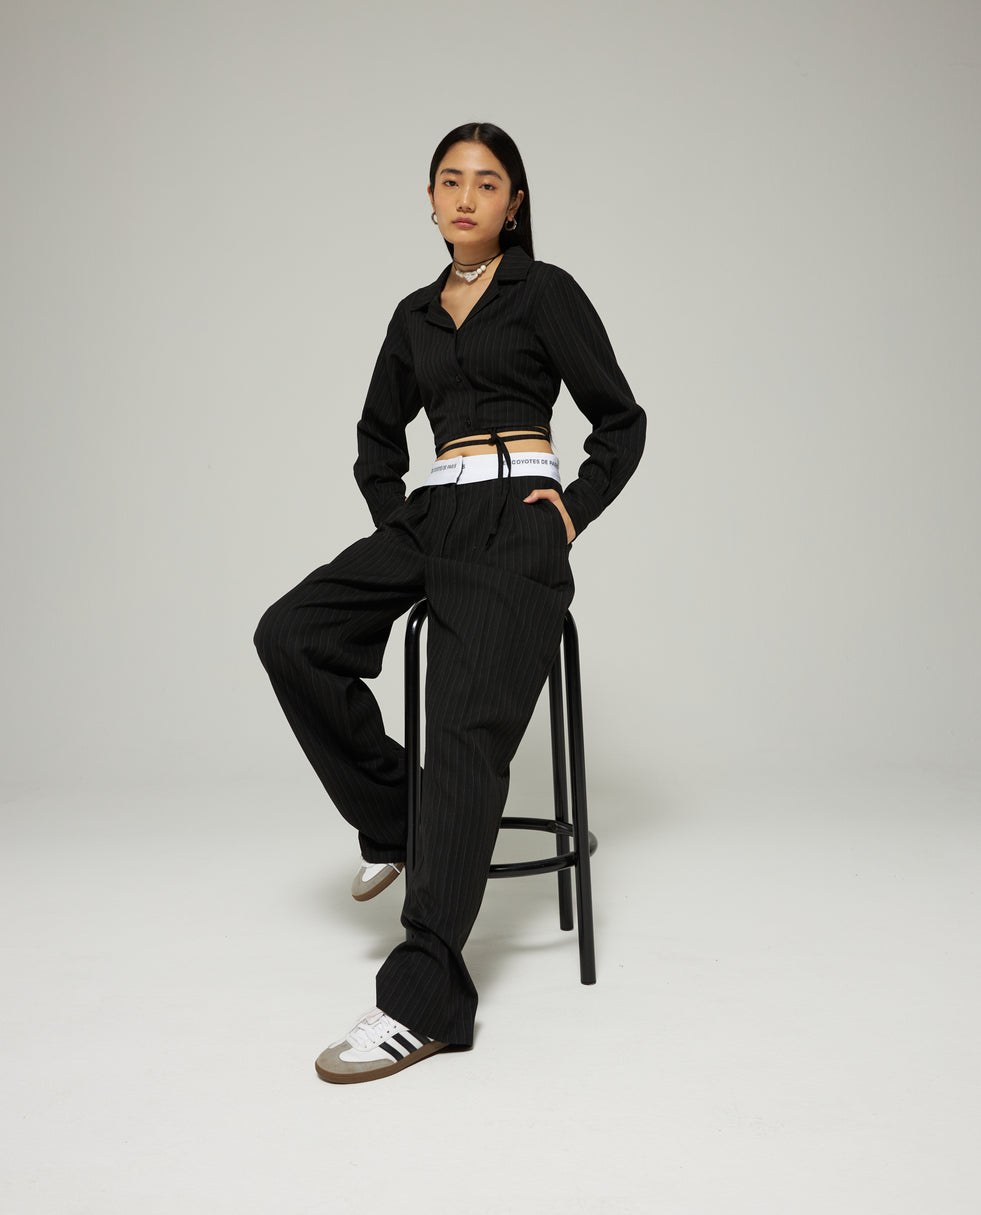 INSIDE OUT WAISTBAND TROUSERS